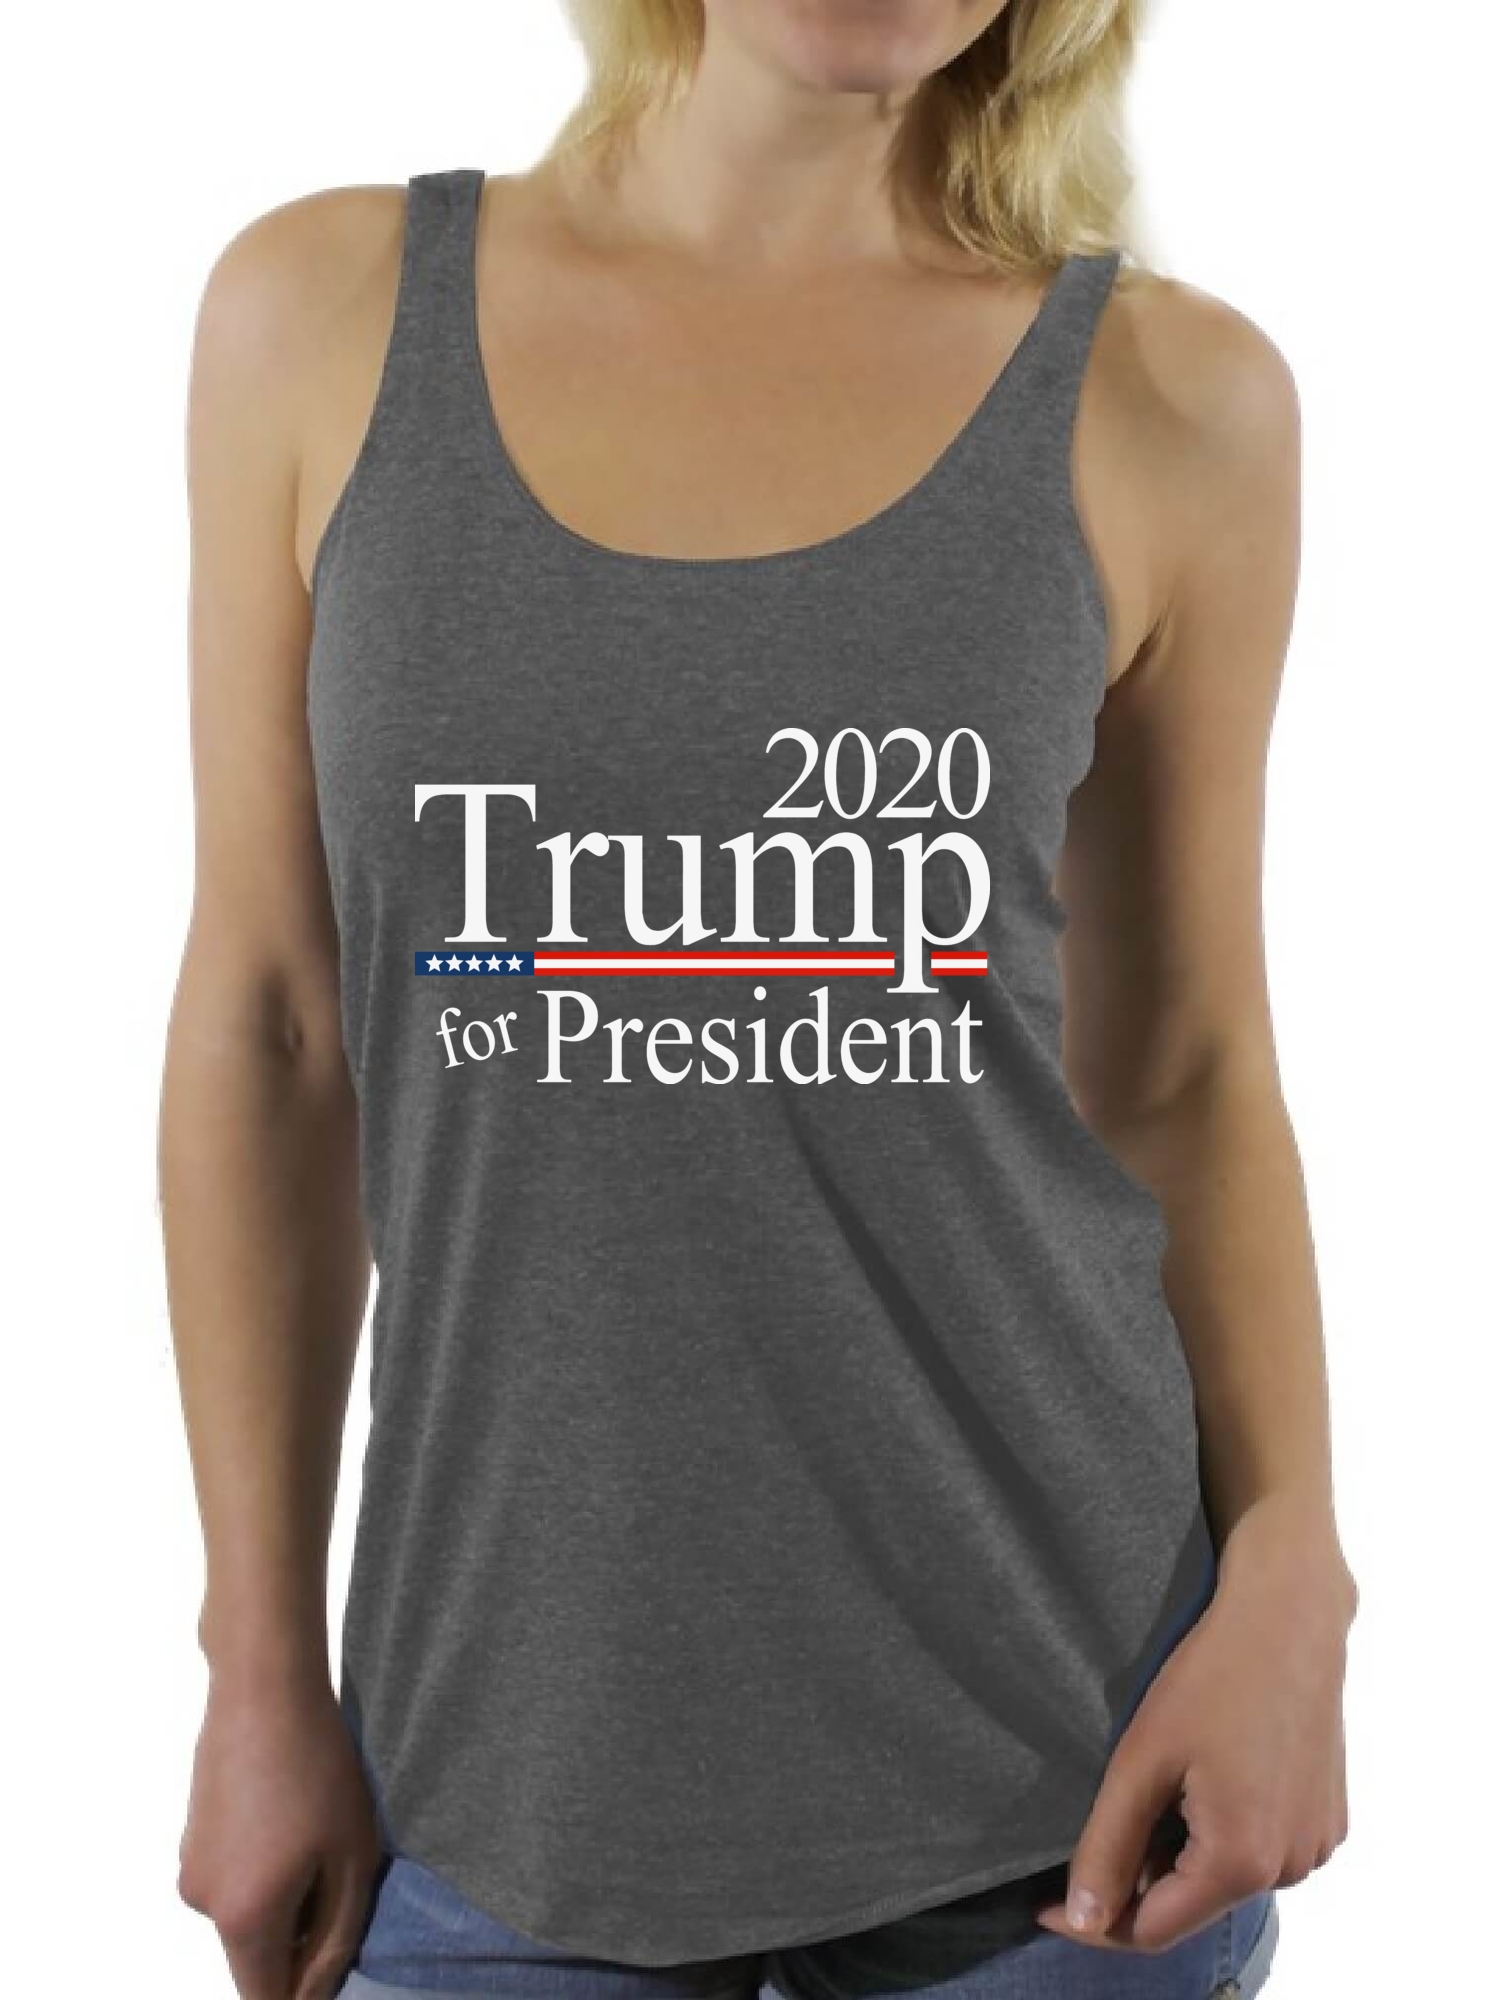 Awkward Styles Trump for President Trump Racerback Tank Top for Women Political Tank Top for Her 2020 Patriotic Clothing 2020 Choice Donald Trump Fans Gifts Re-Elect Trump 2020 American Clothes - image 1 of 4